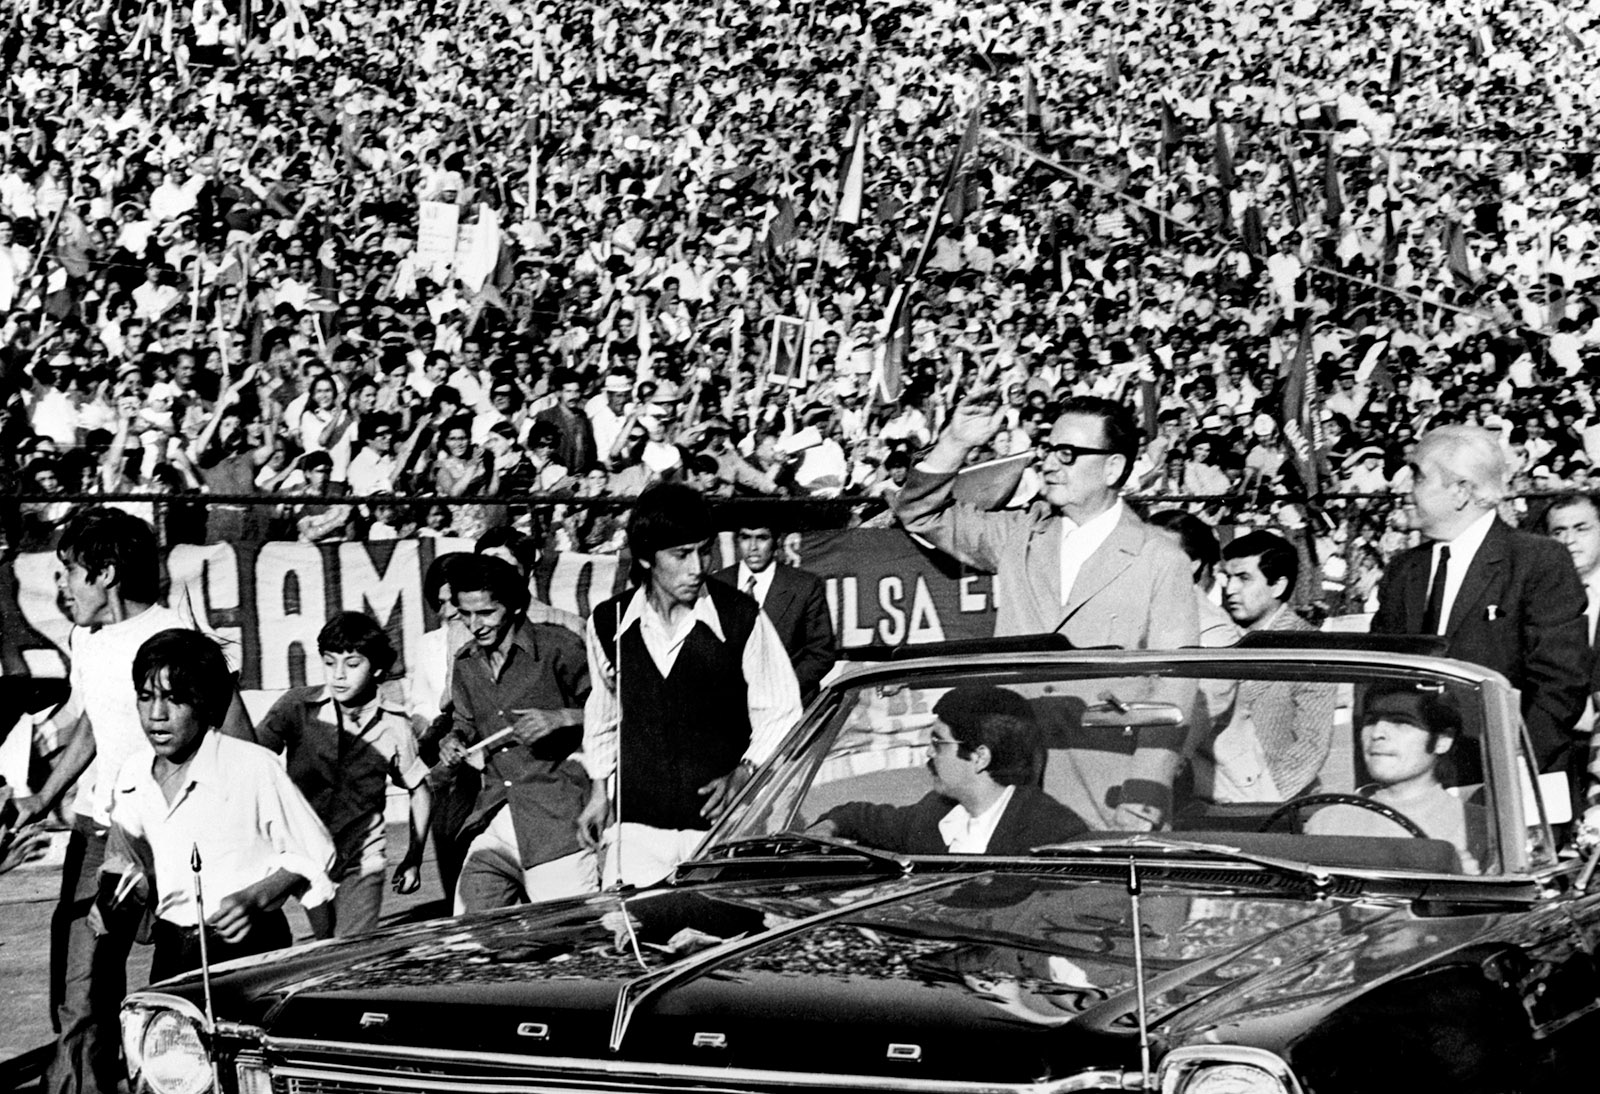 Salvador Allende campaigning before Chile’s parliamentary elections